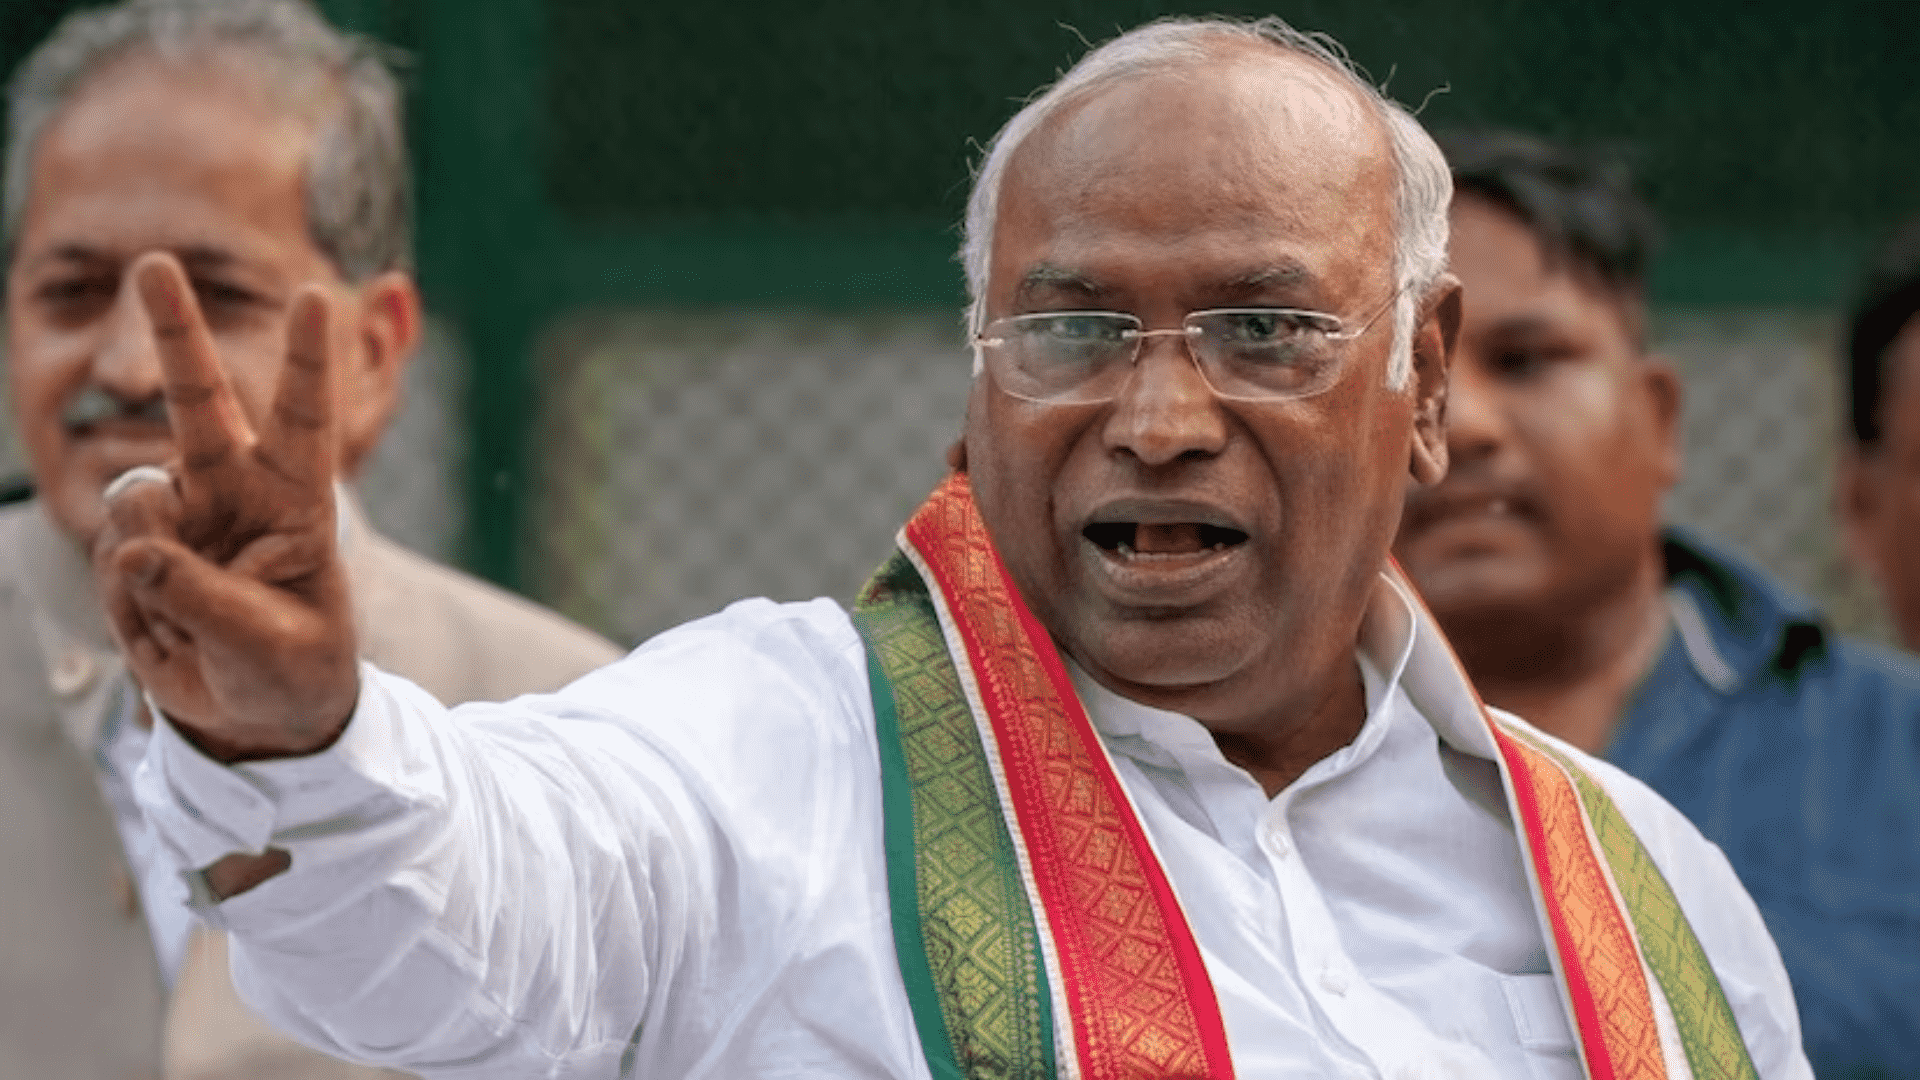 Mallikarjun Kharge: “PM did not implement even one of his electoral promises”